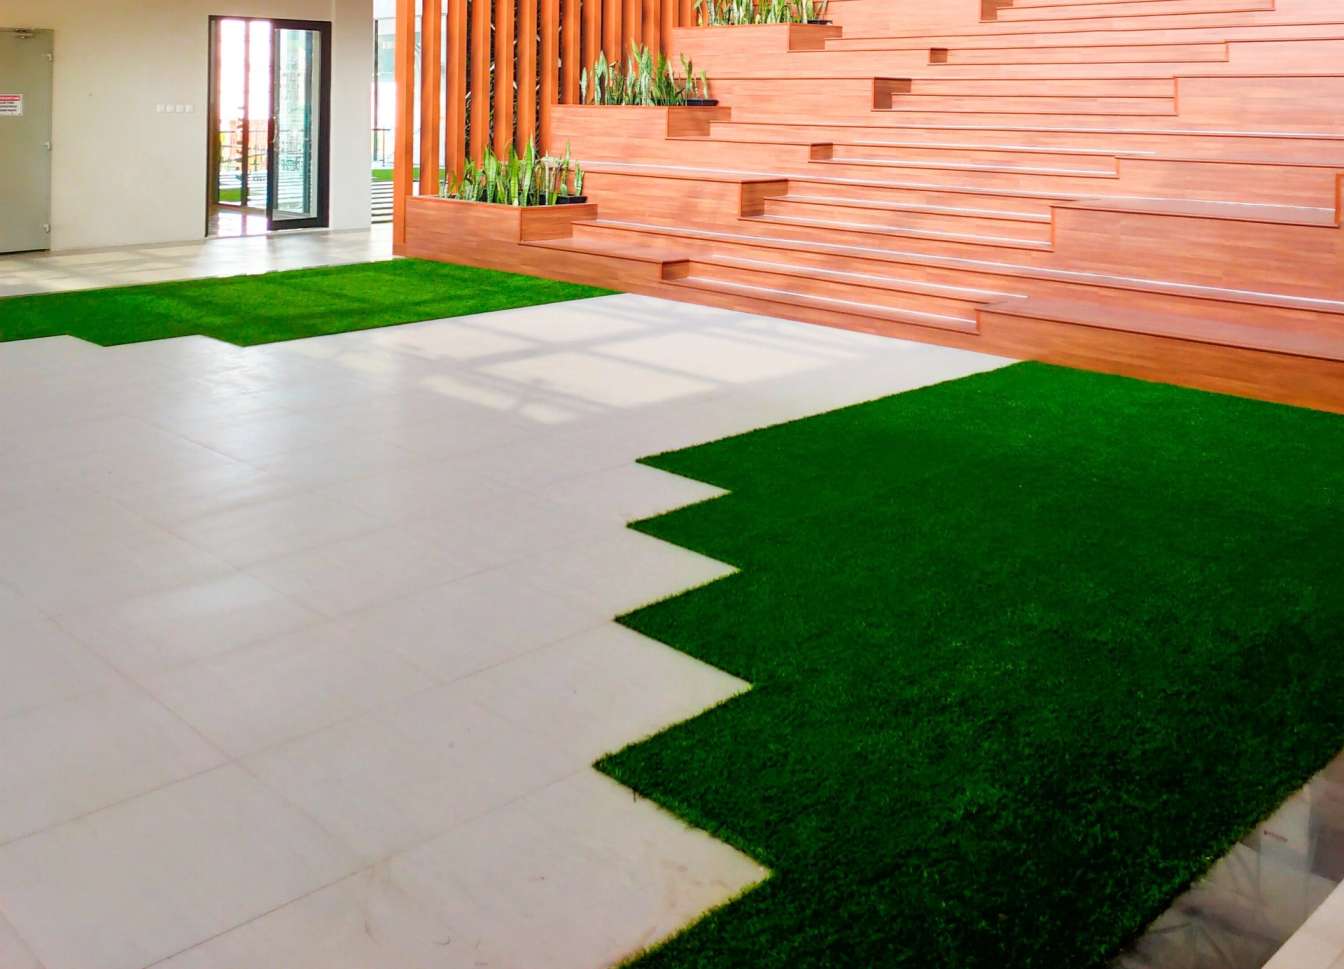 A modern interior space in Jacksonville, FL, featuring wood panel steps with integrated planters on the right. Adjacent to a pattern of green artificial grass and white tiles on the floor, this area is well-lit with large windows visible in the background—perfect for those seeking expert turf installations.